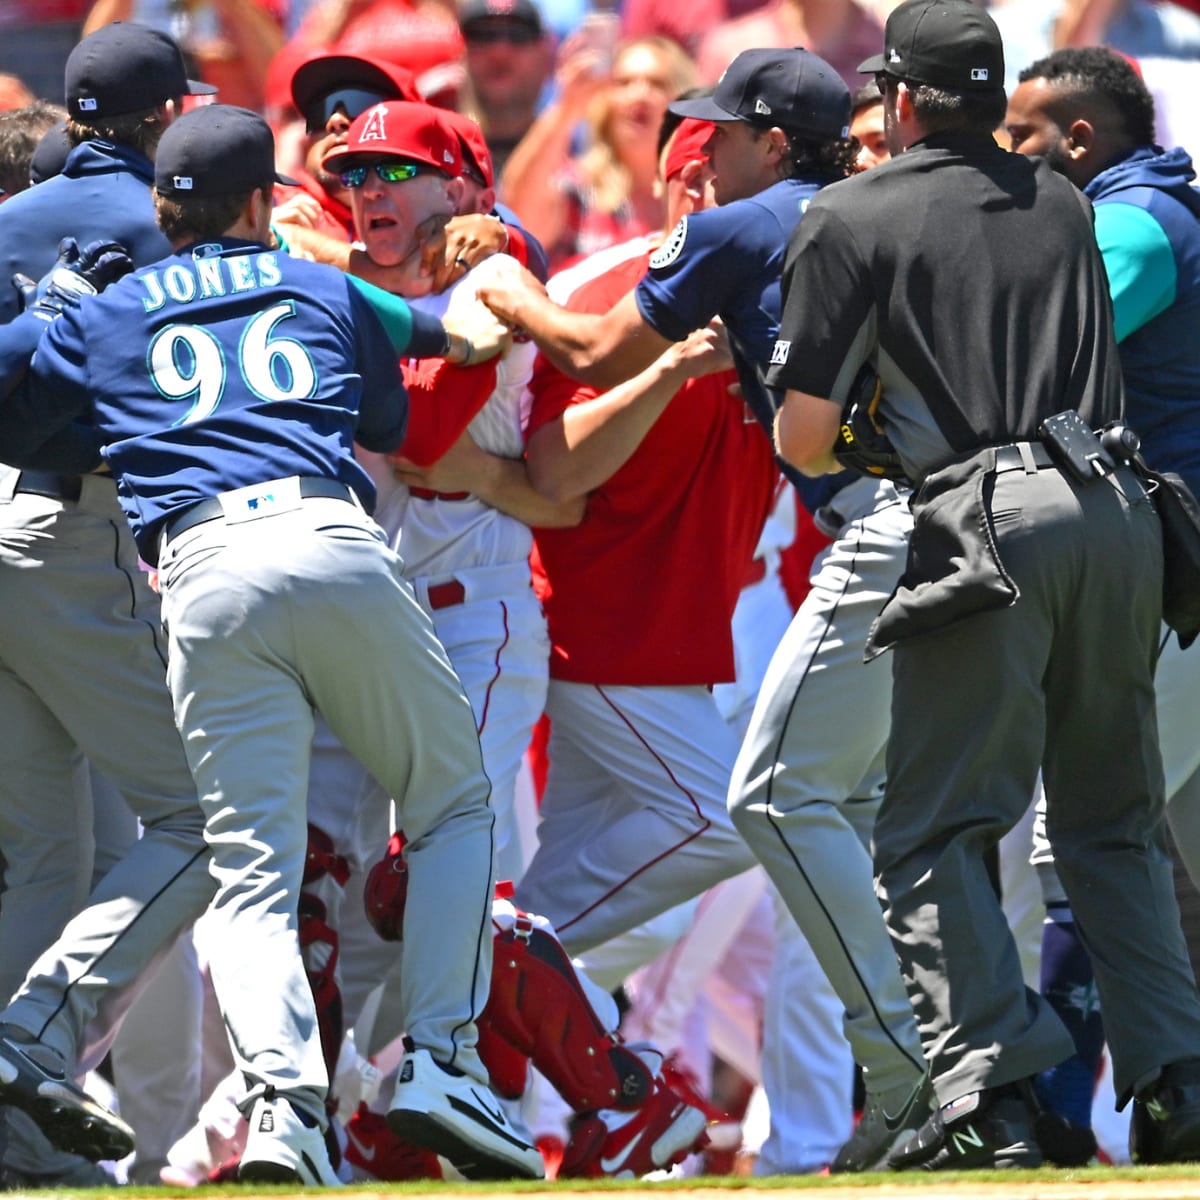 Seattle Mariners fan sends Jesse Winker a pizza after ejection and